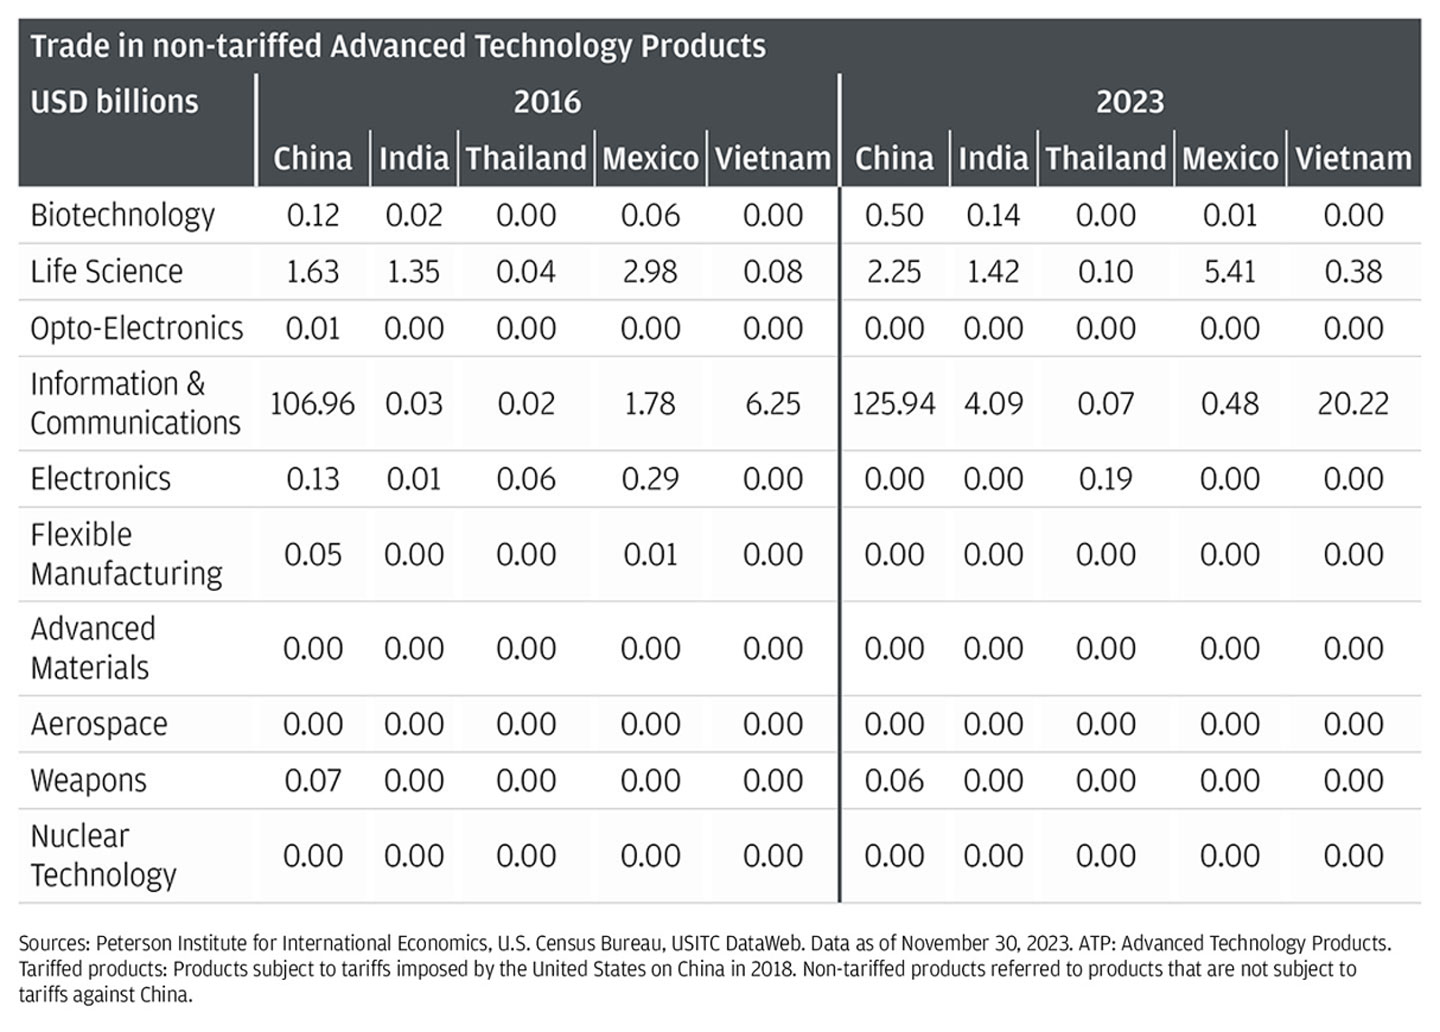 This table describes the trade of U.S. imports of Advanced Technology Products not tariffed against China by country (China, India, Thailand, Mexico, Vietnam) in 2016 and 2023.